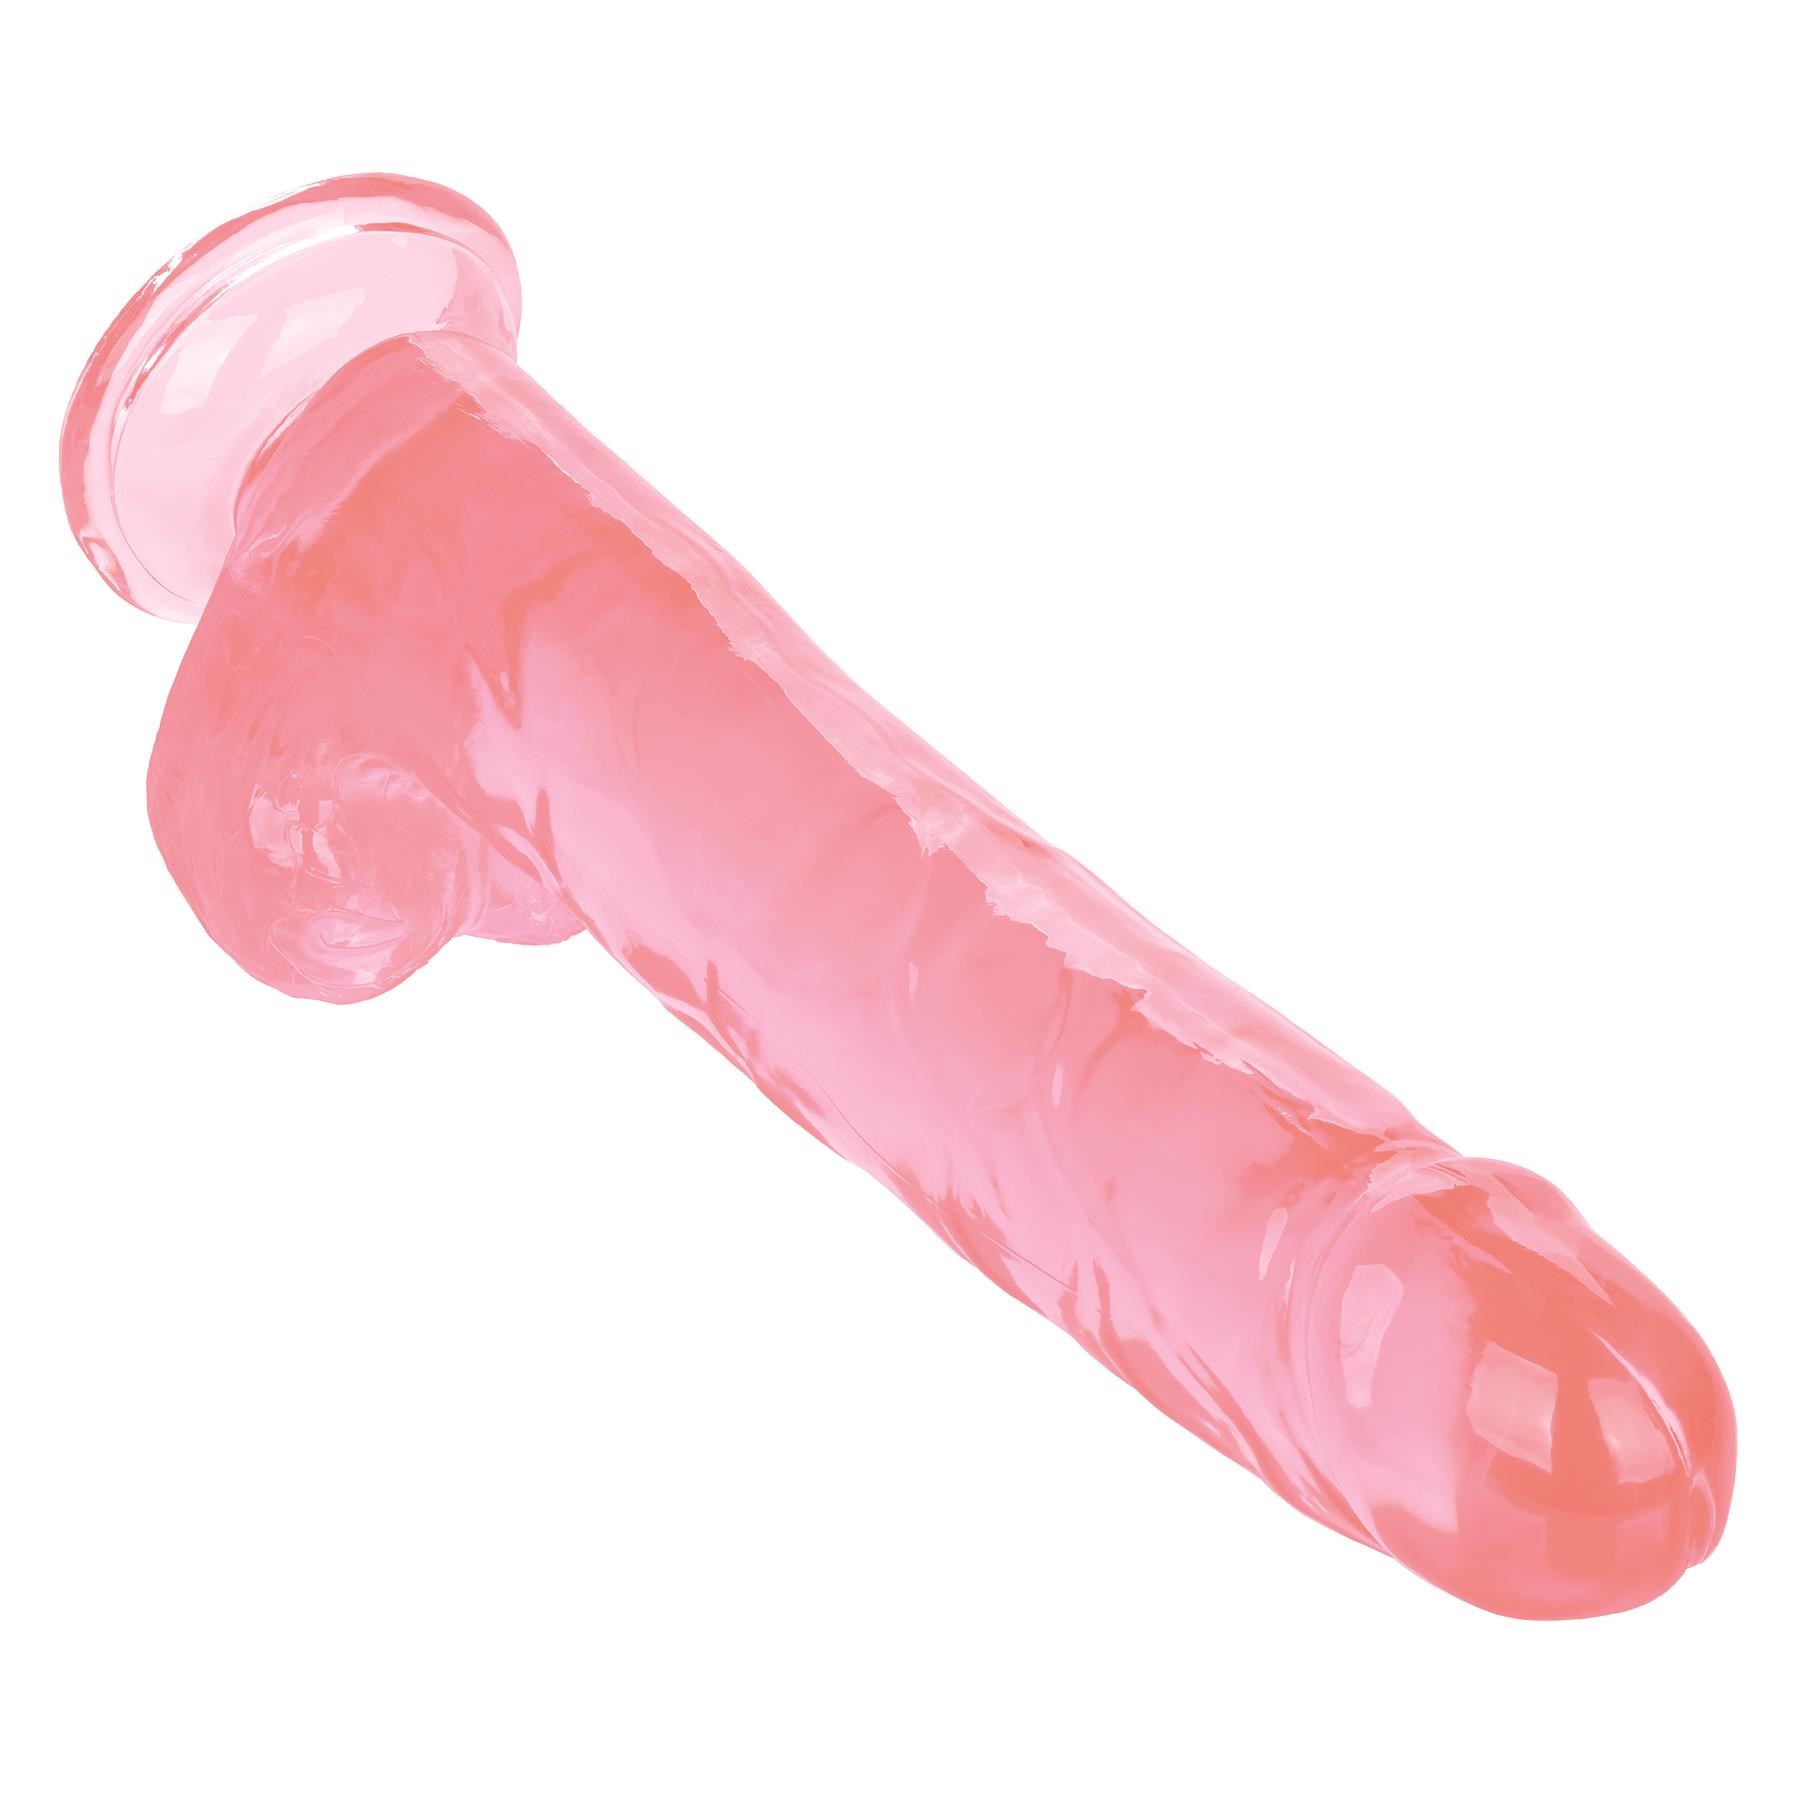 Size Queen 10 Inch Dildo Tip Pointing Downward - Pink